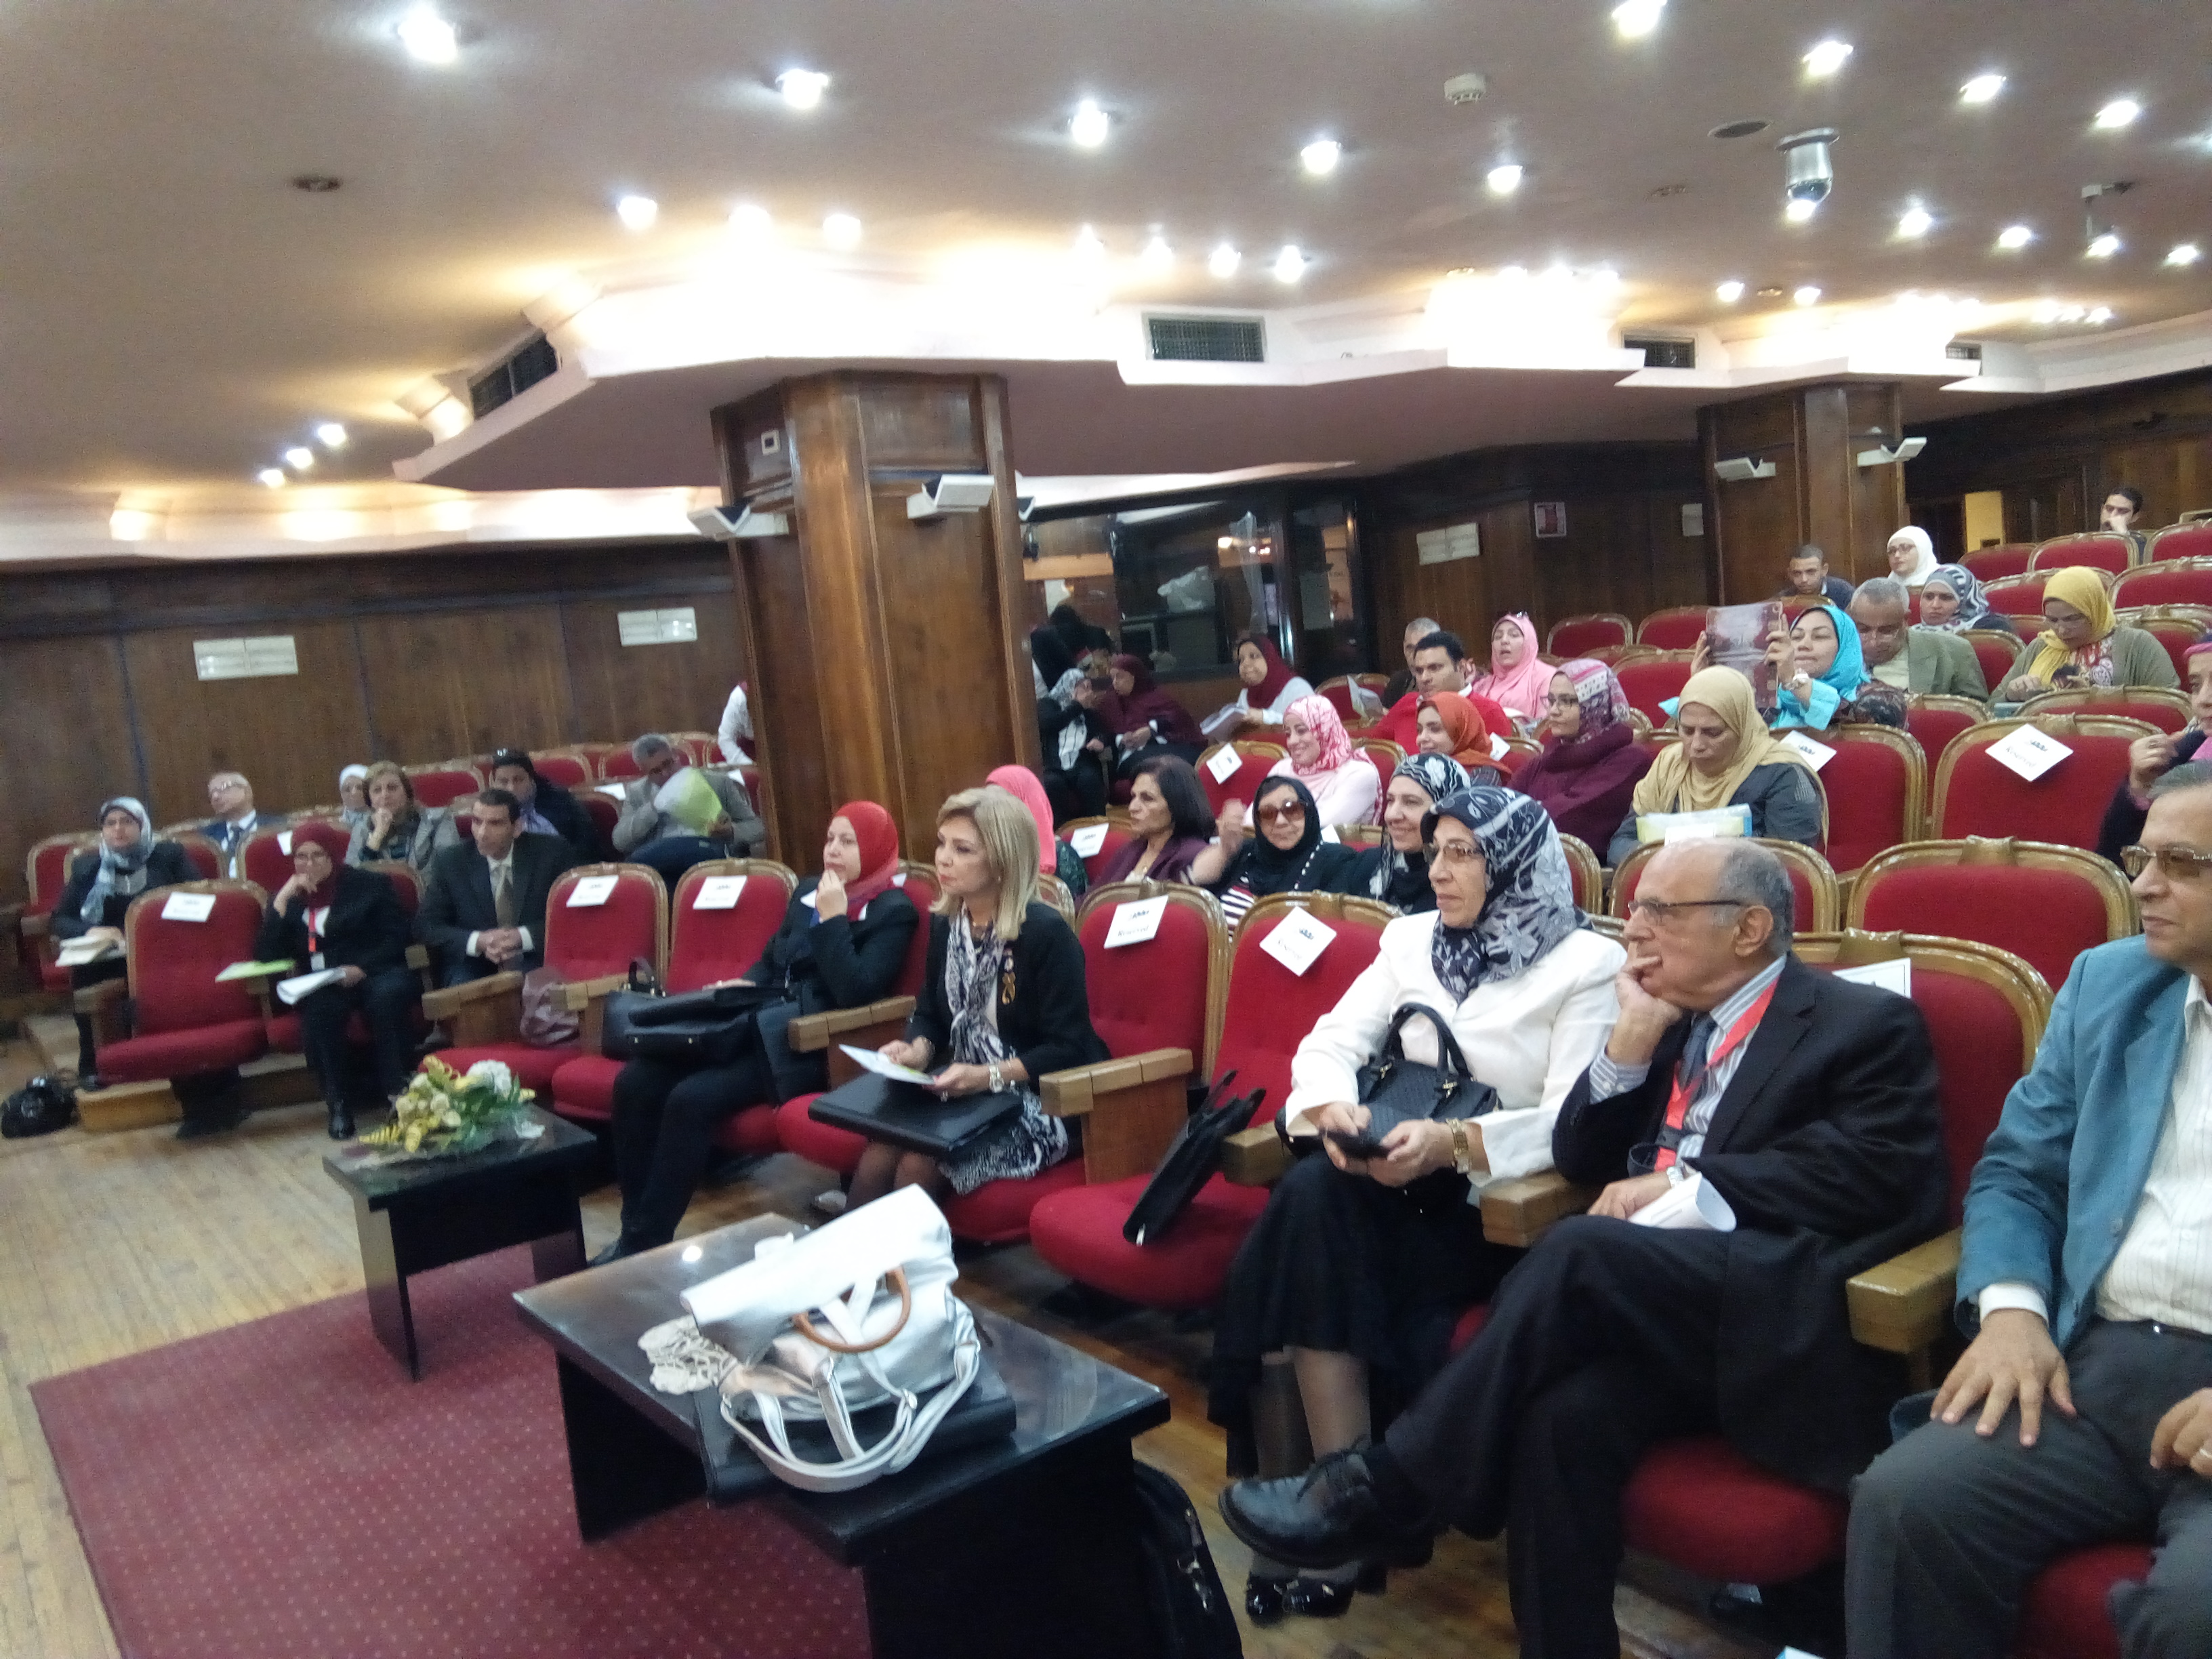 The Second Annual Conference Children 's Literature in Egypt and the Arab World through the Ages